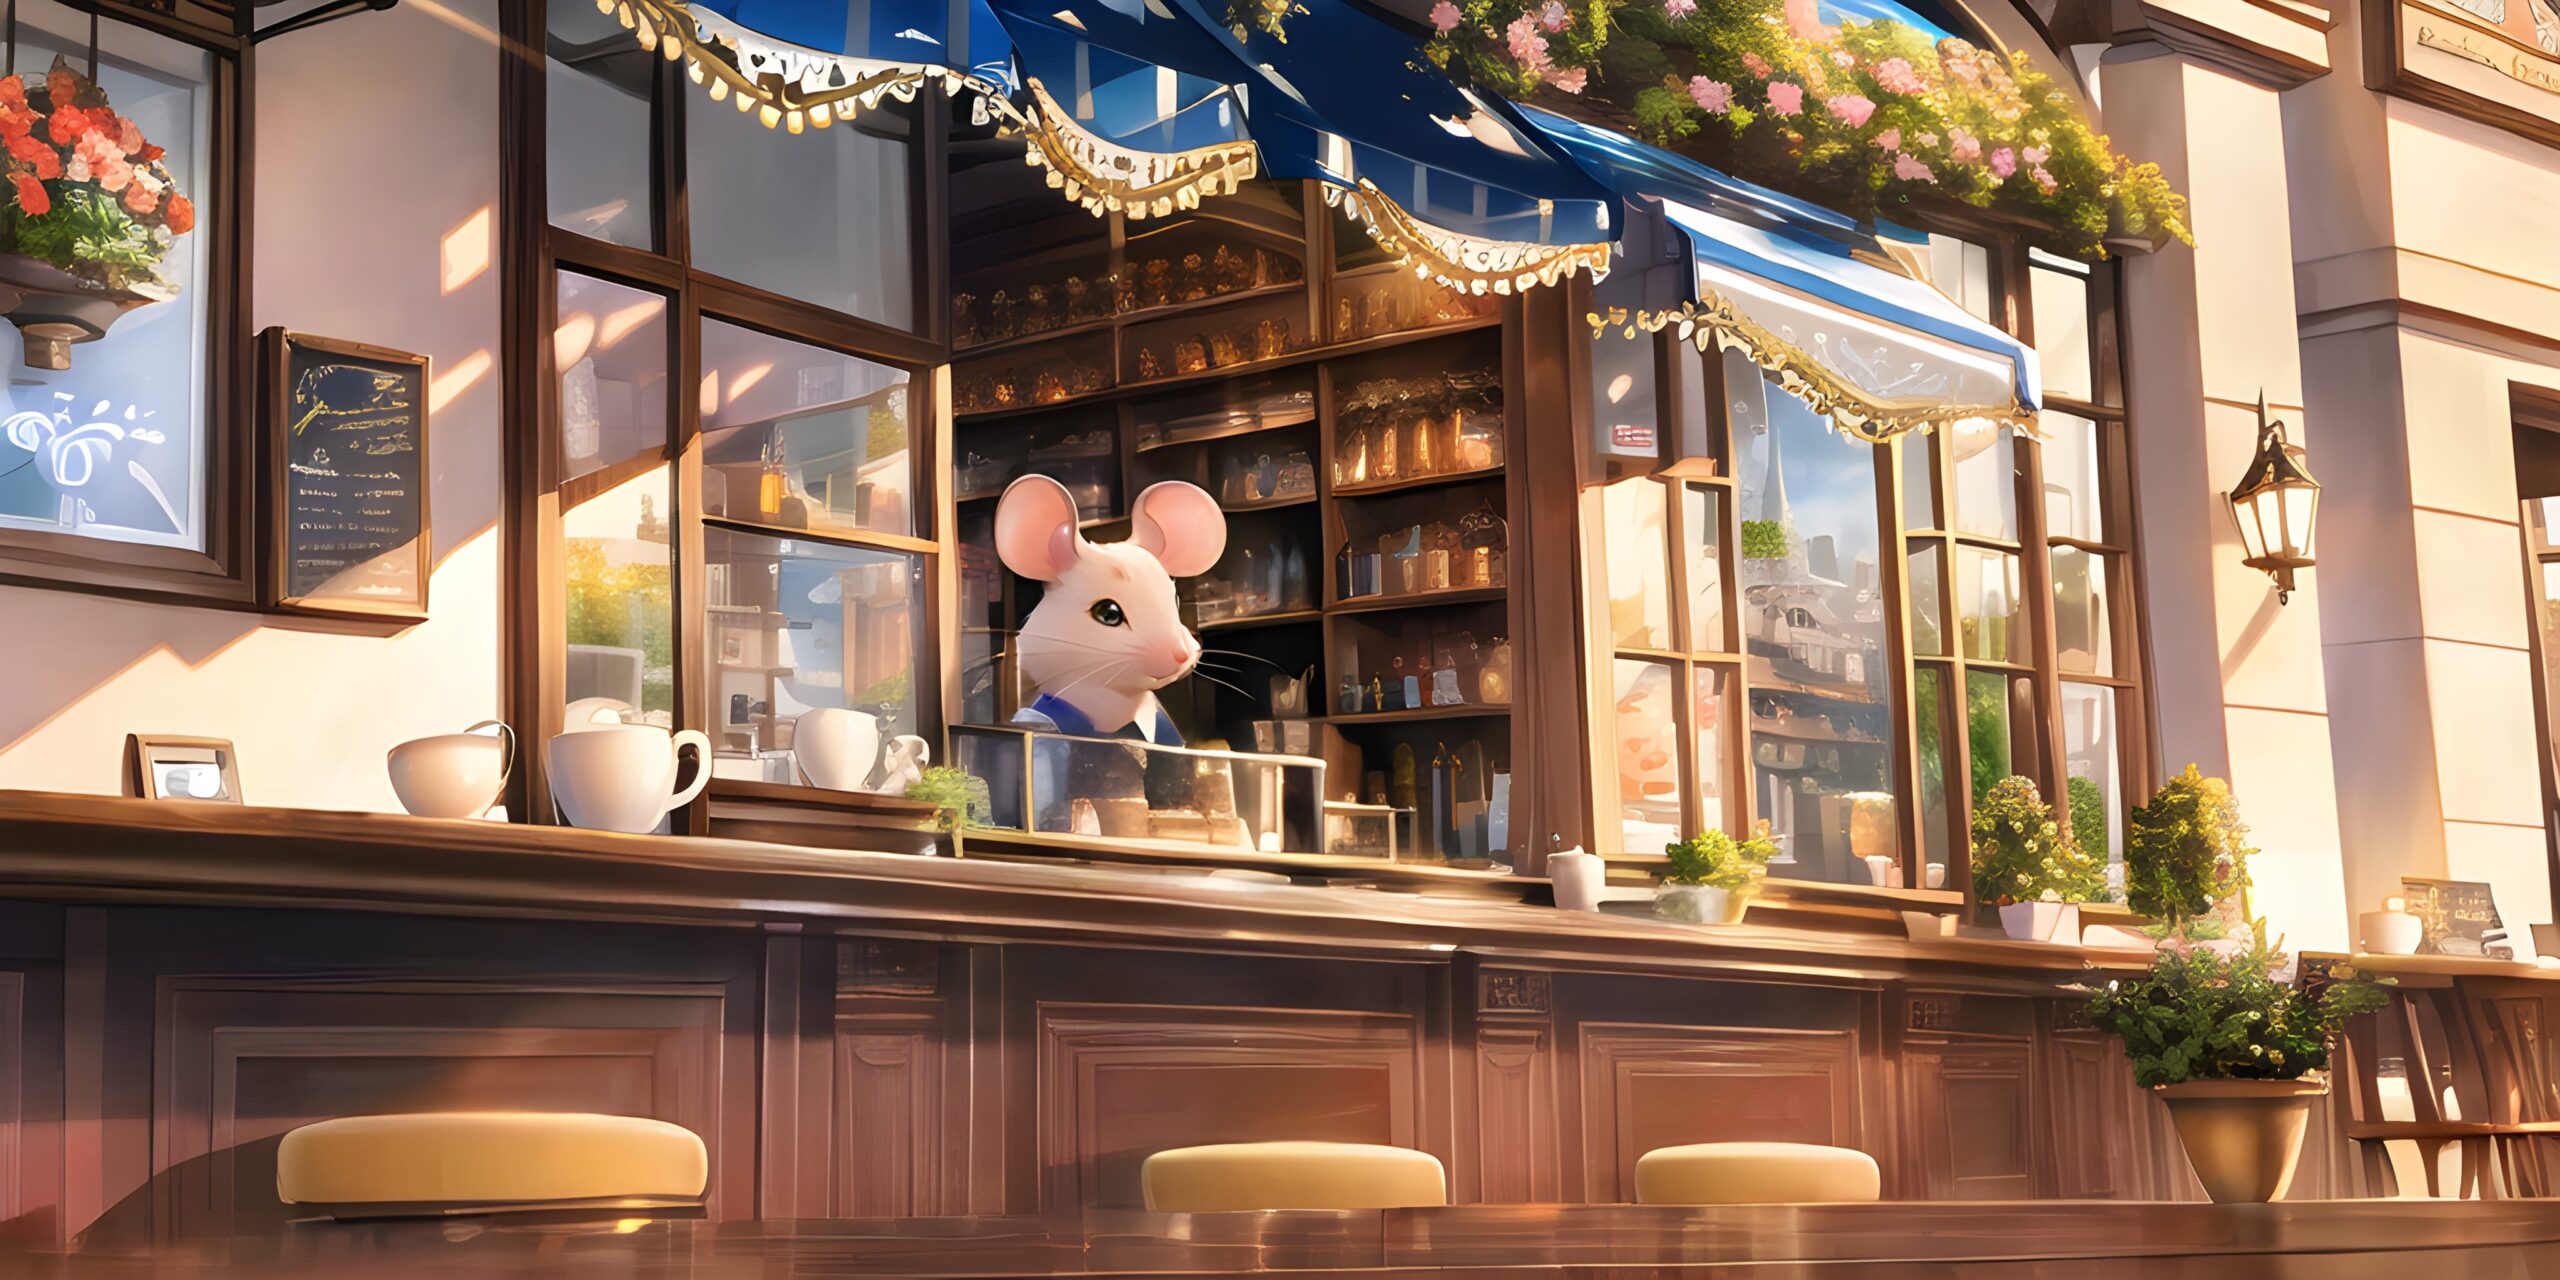 The Mouse Coffee House